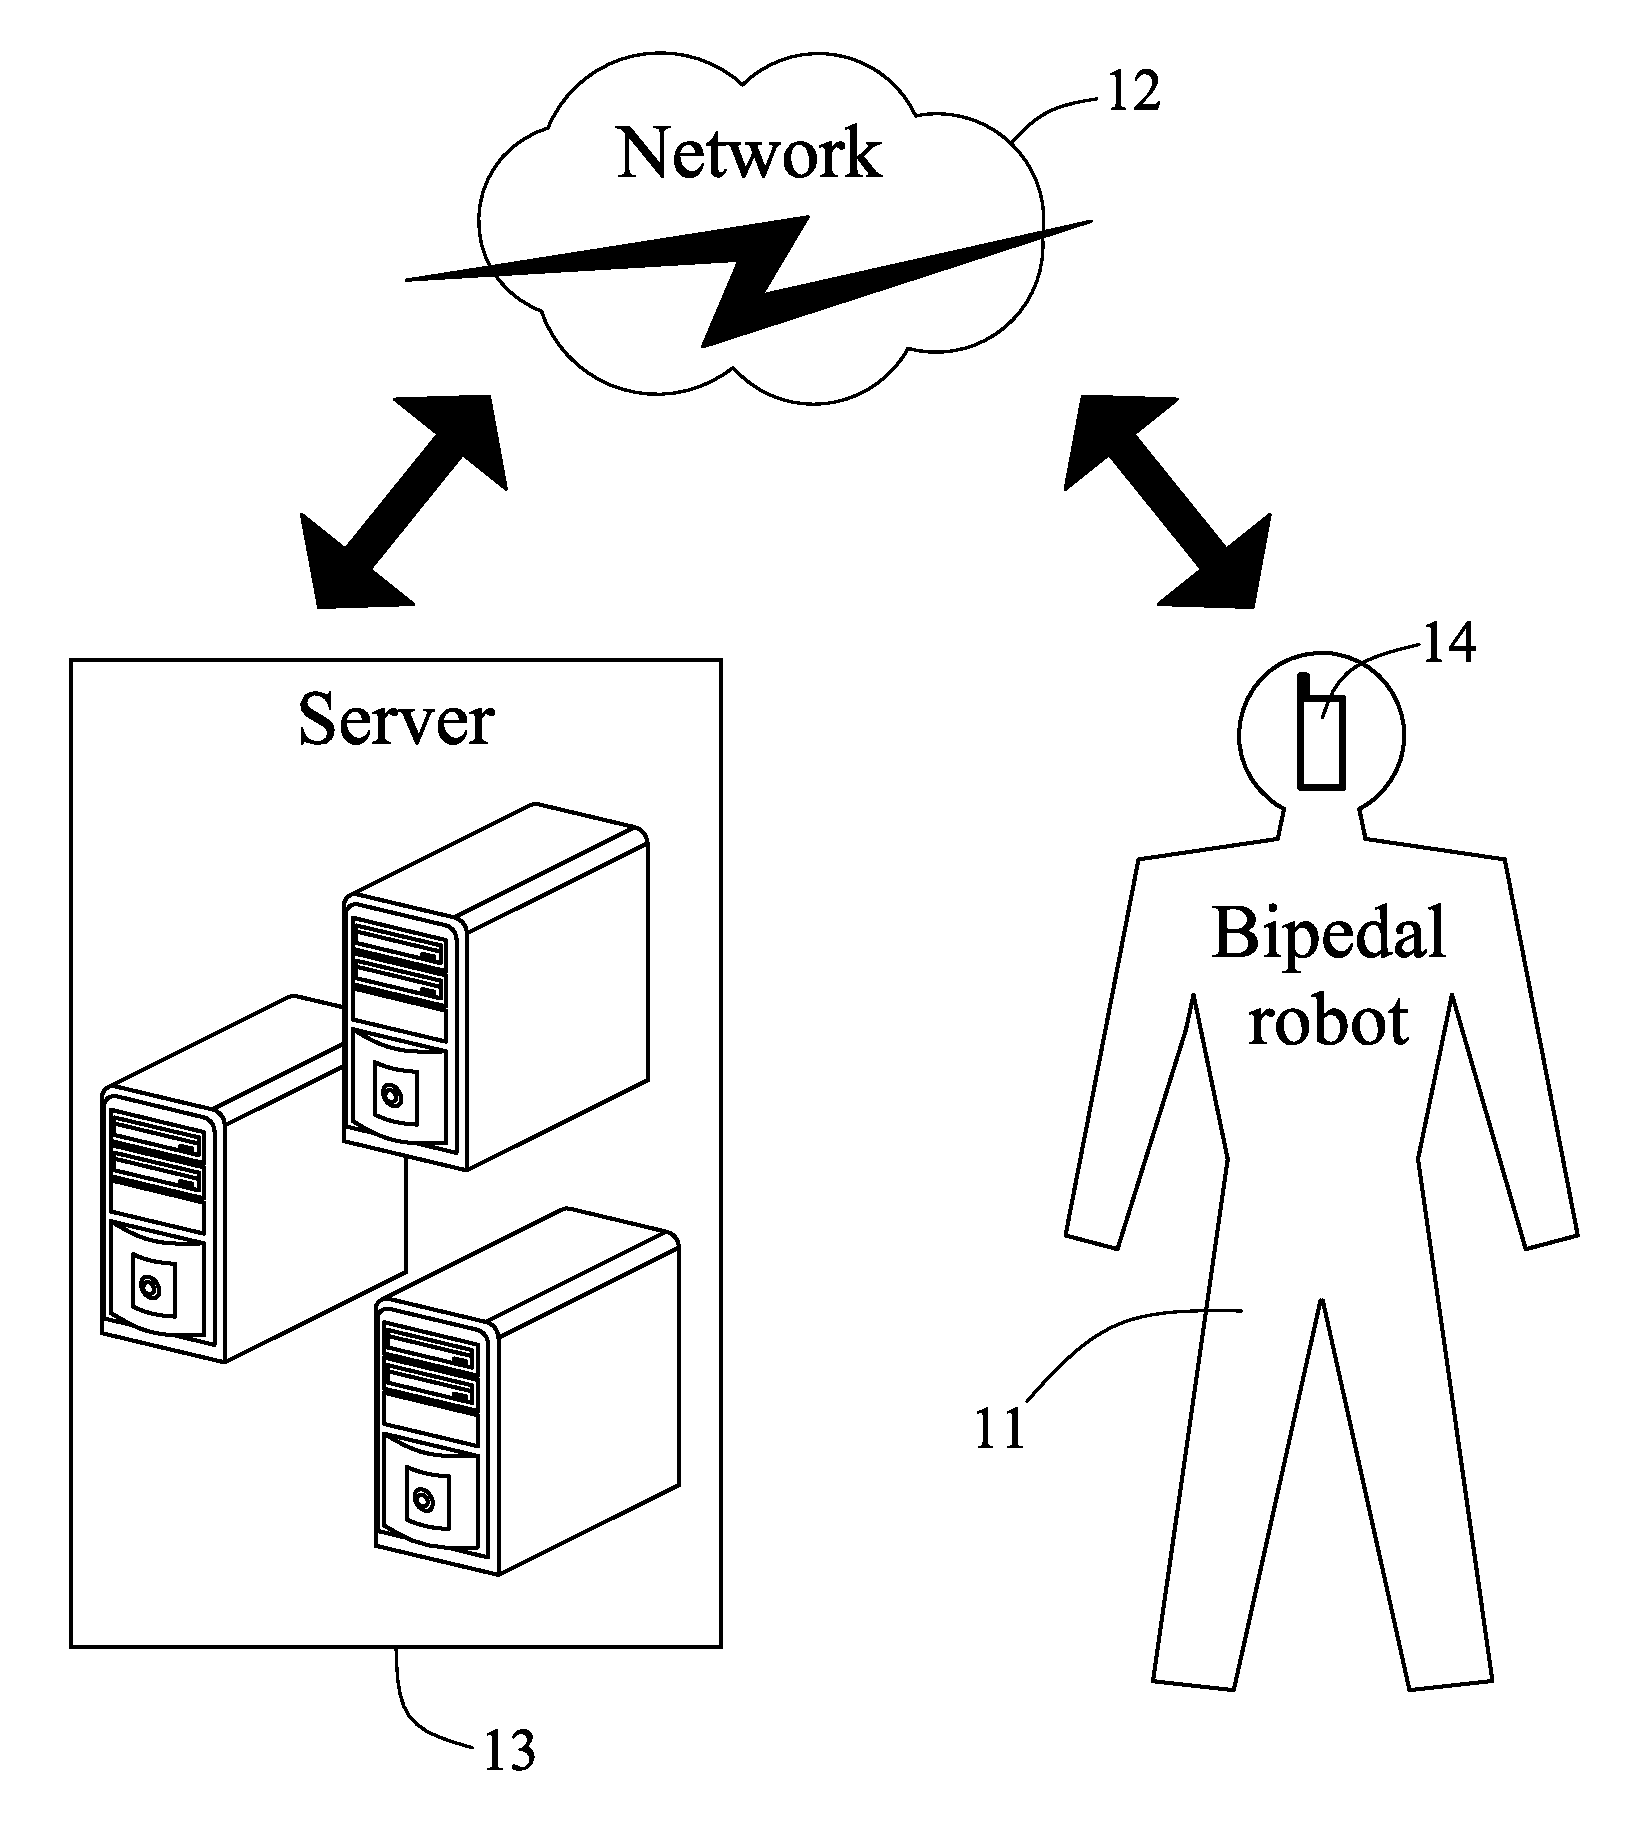 System and method for controlling a bipedal robot via a communication device